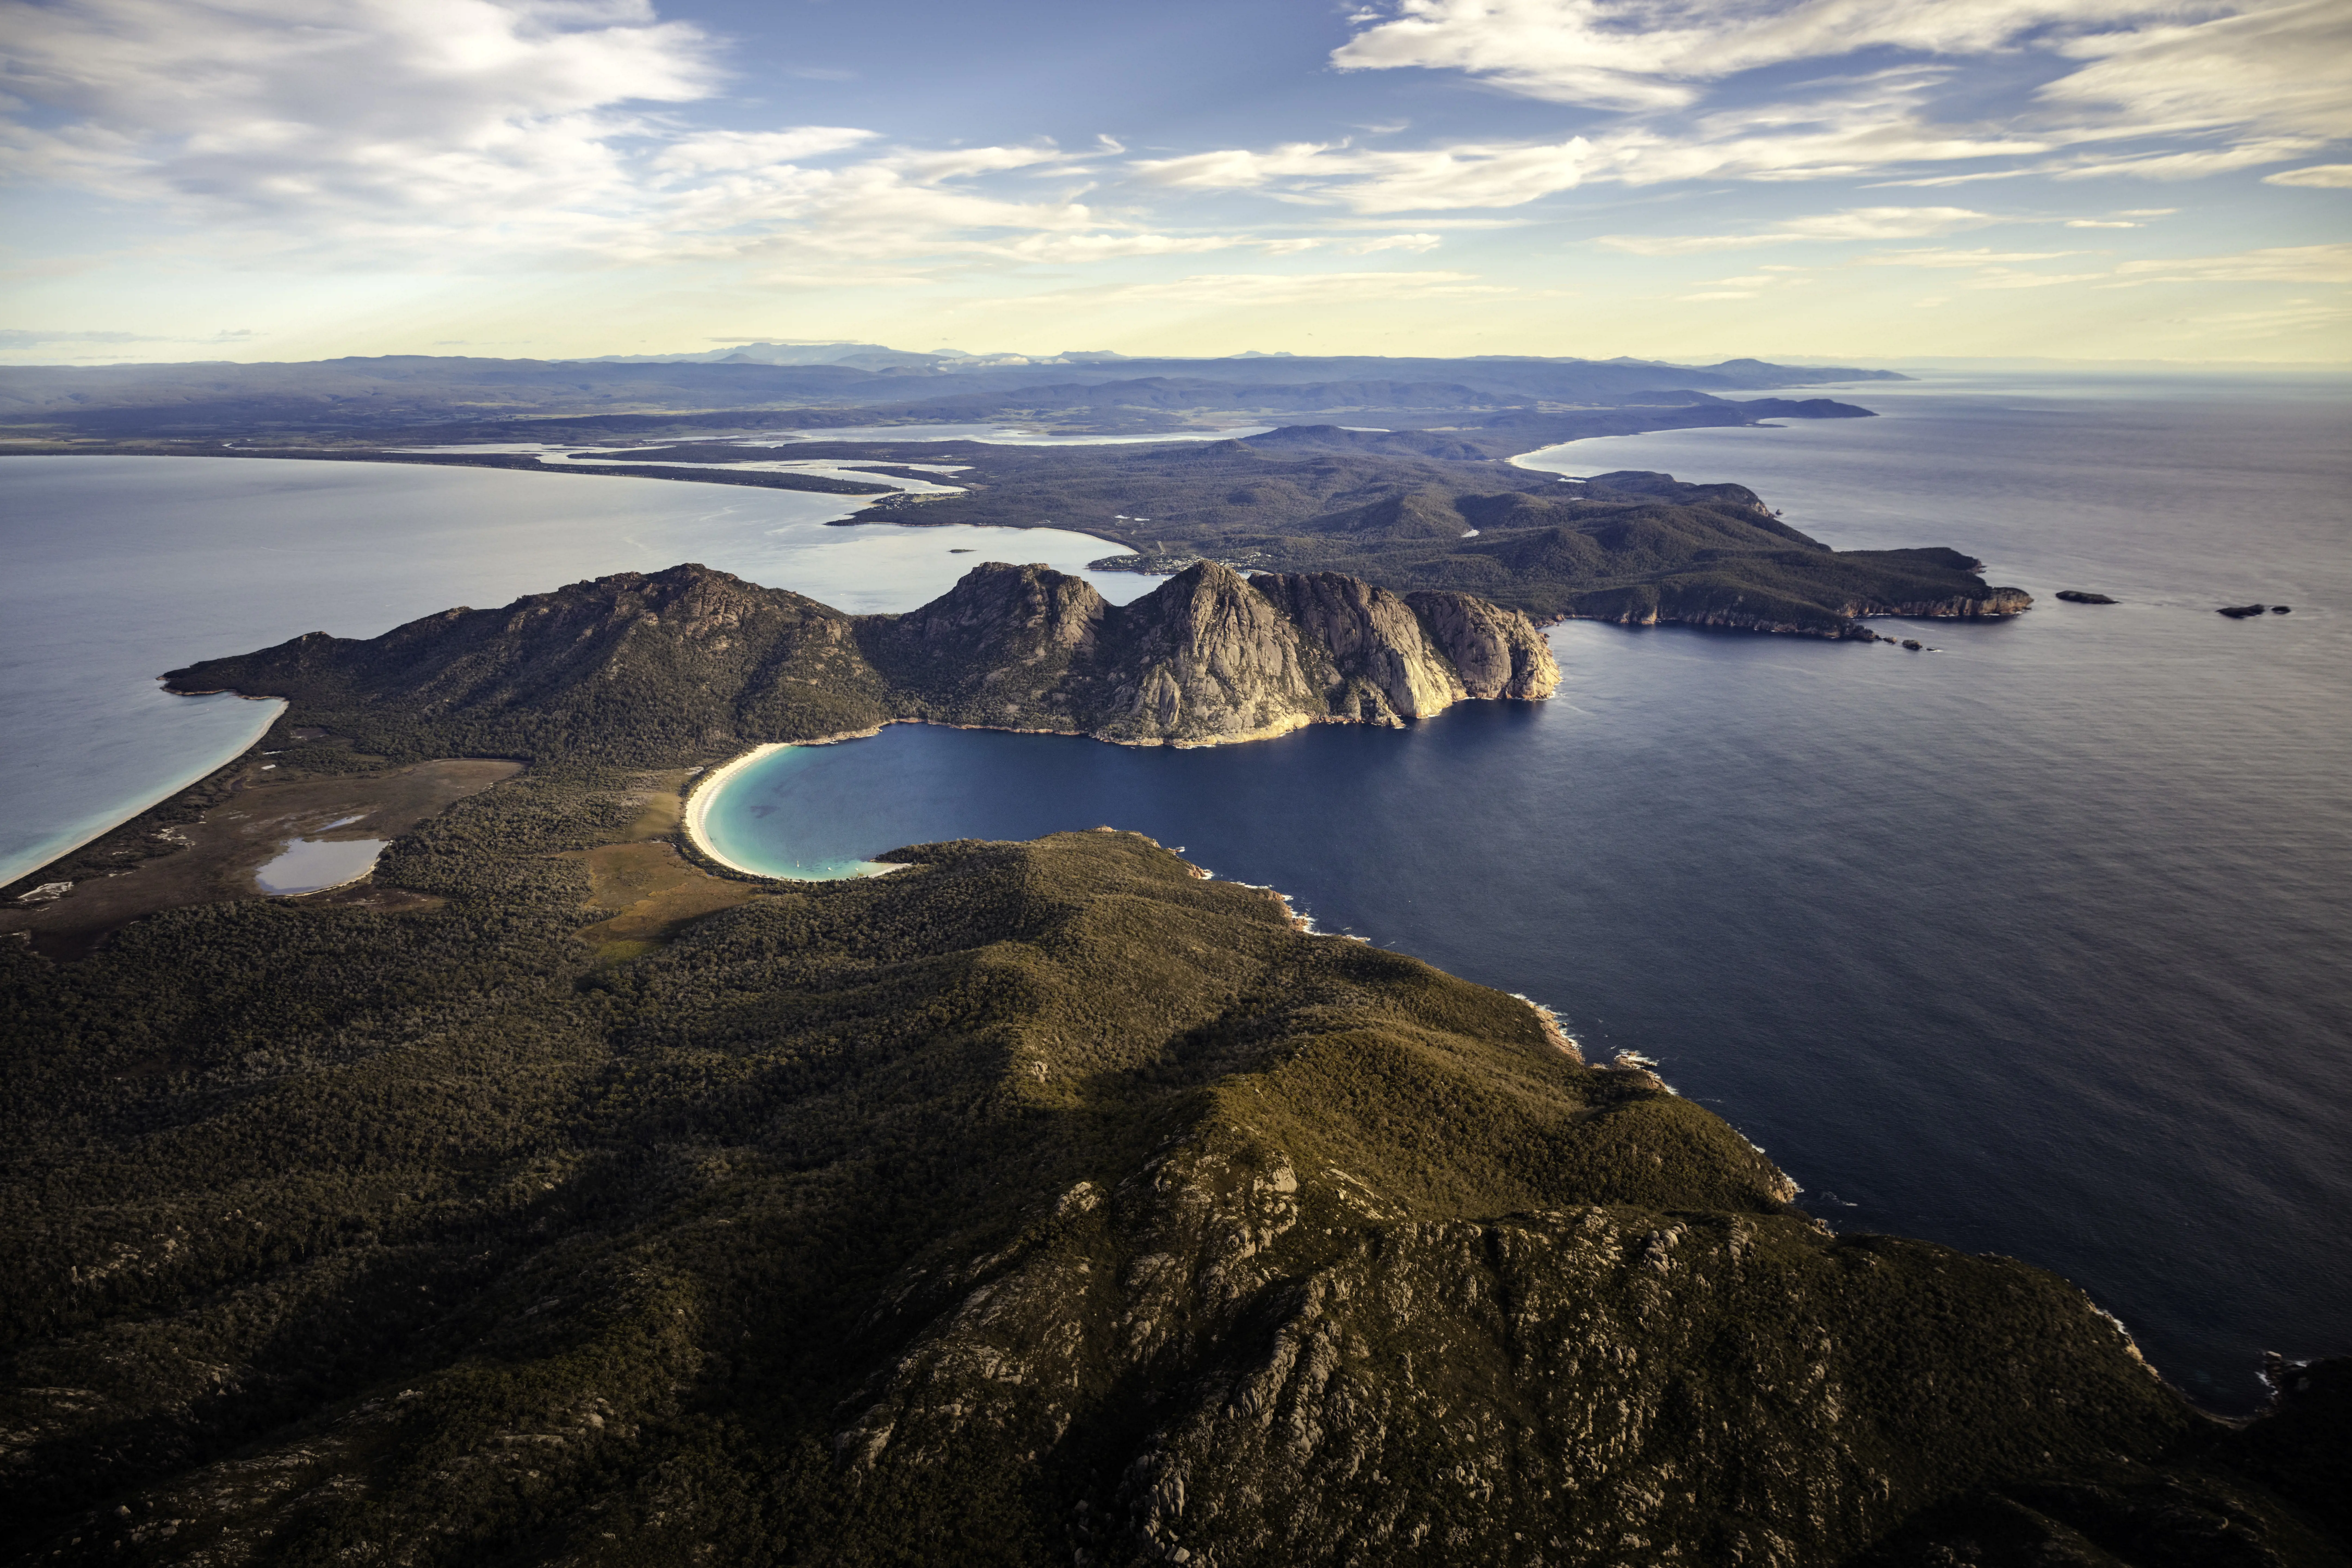 Wineglass Bay and the Freycinet Peninsula looking from above